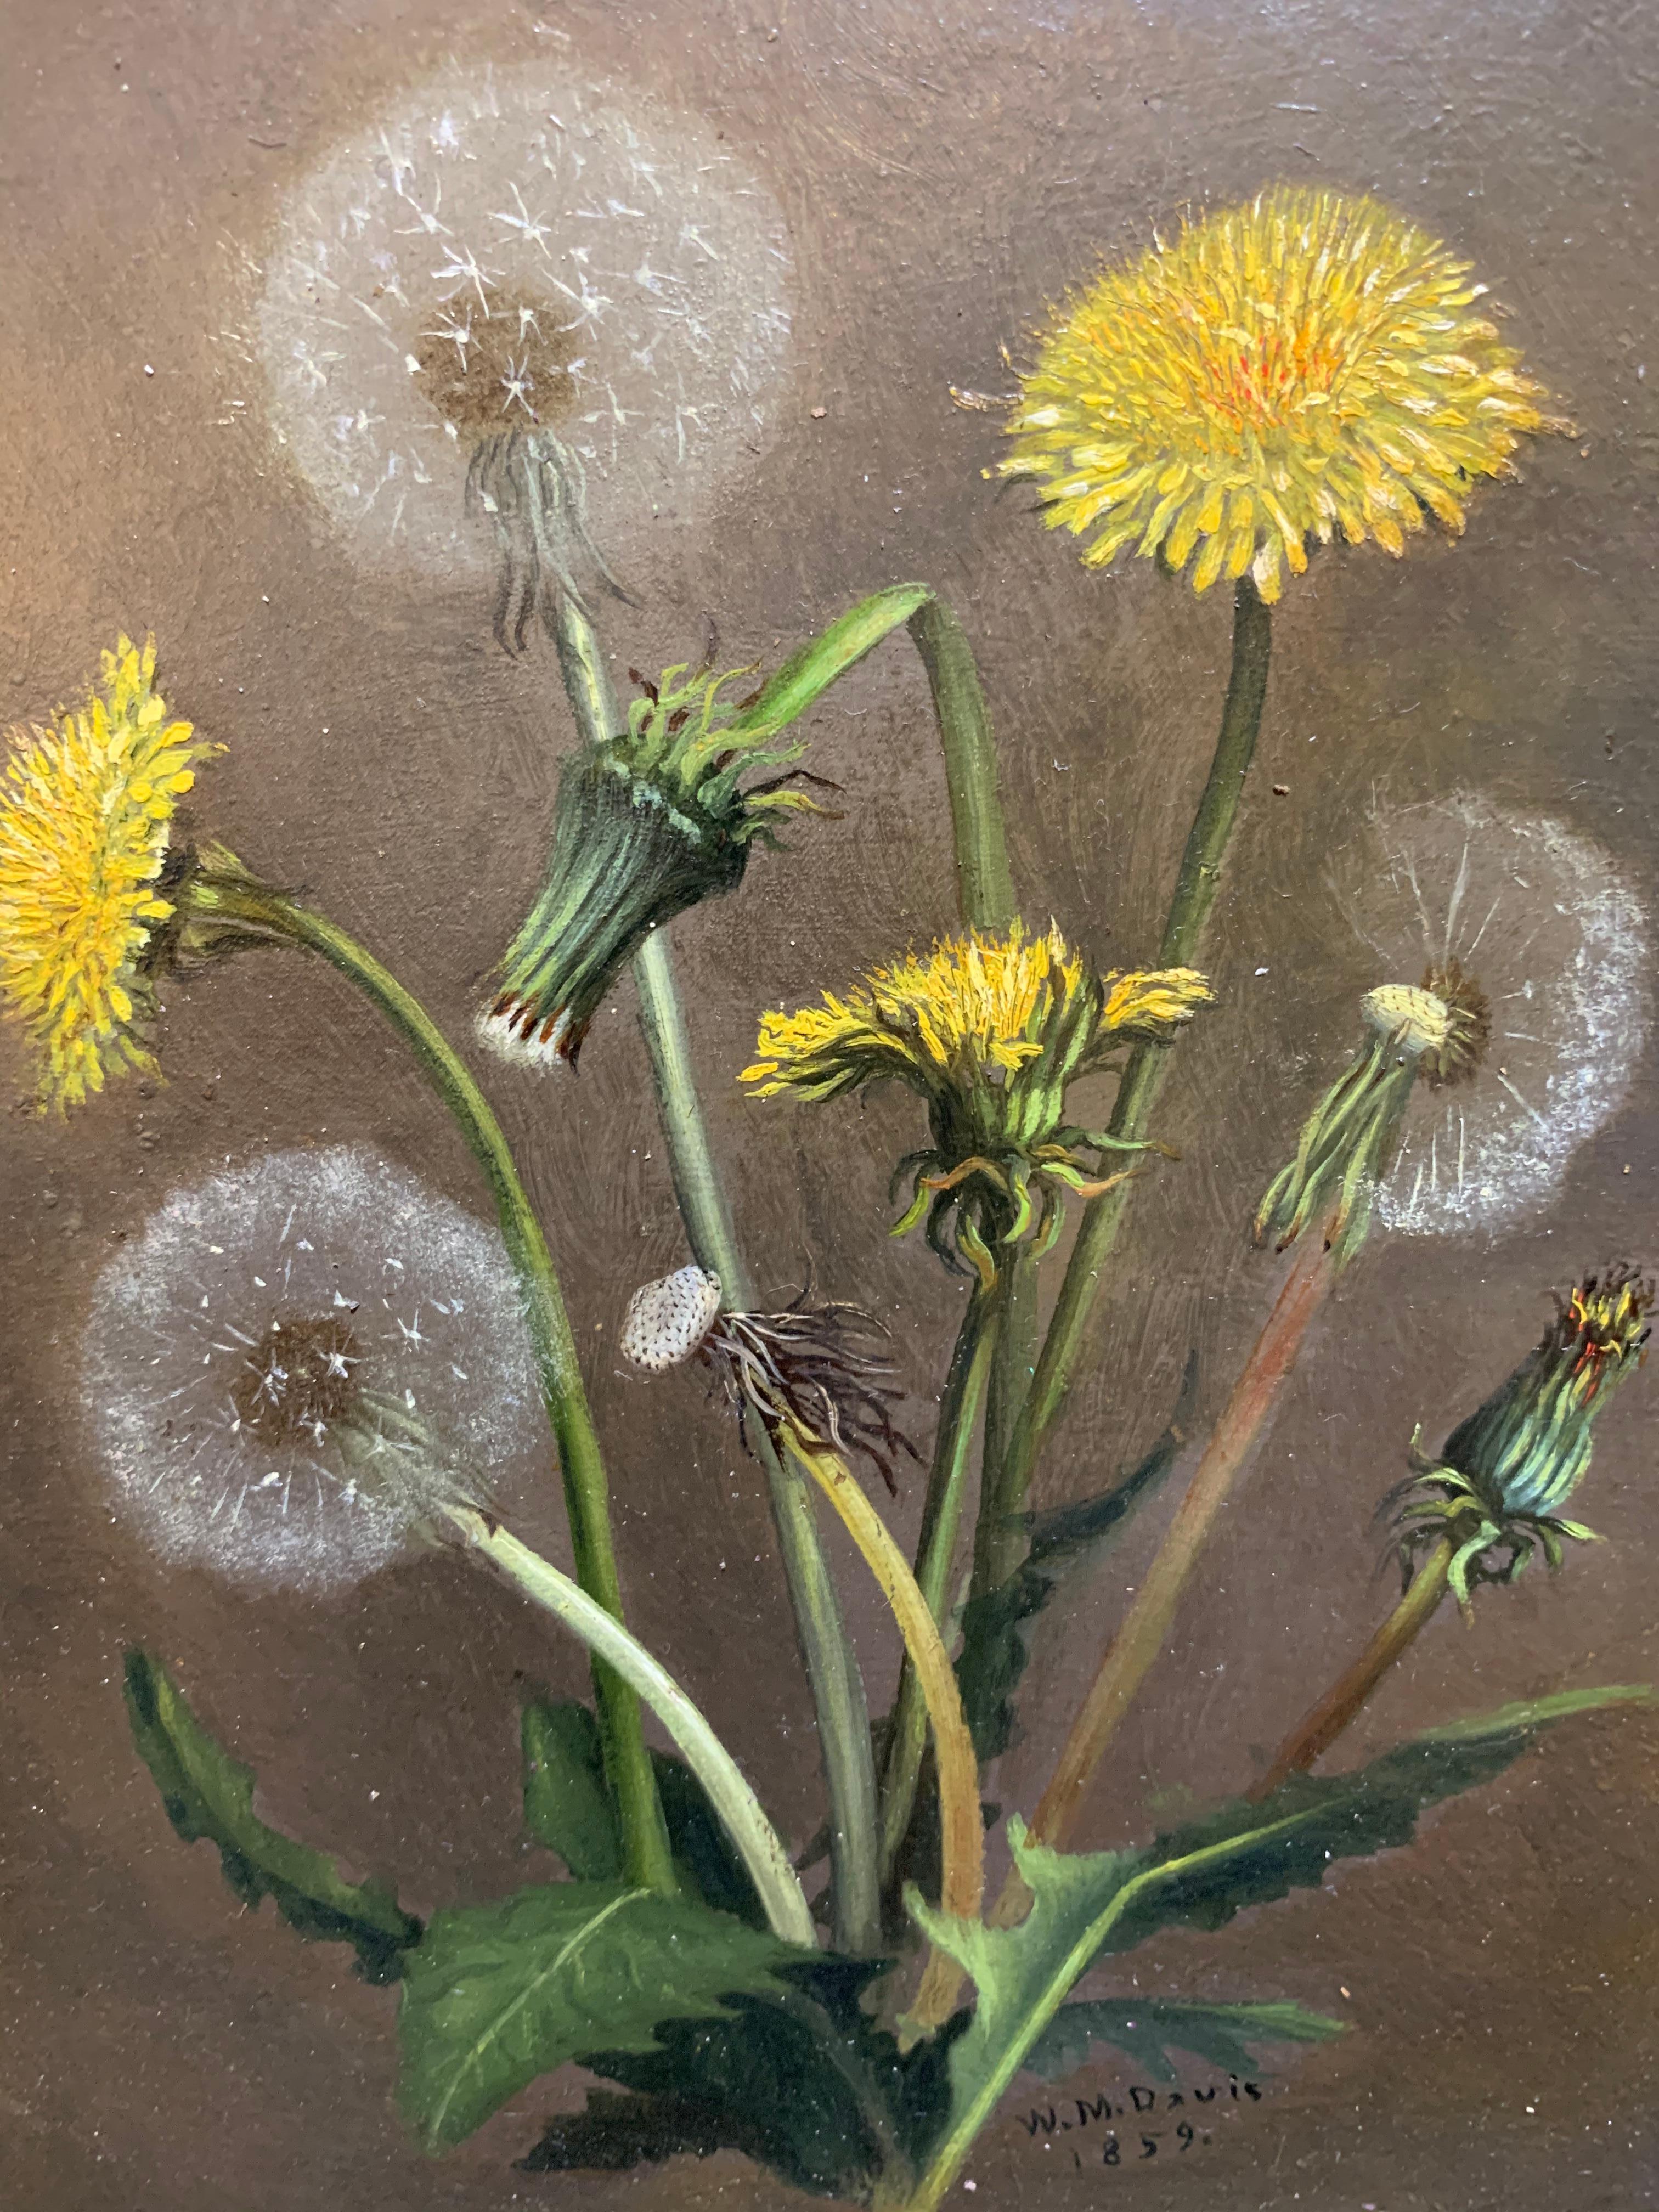 An 1859 one of a kind William Moore Davis (1829-1920) realist painting of dandelions and thistles. It is a rare painting to find that is so photo realistic in this time period. 
Painted with strong, intricate hairline brush strokes.
Signed Lower